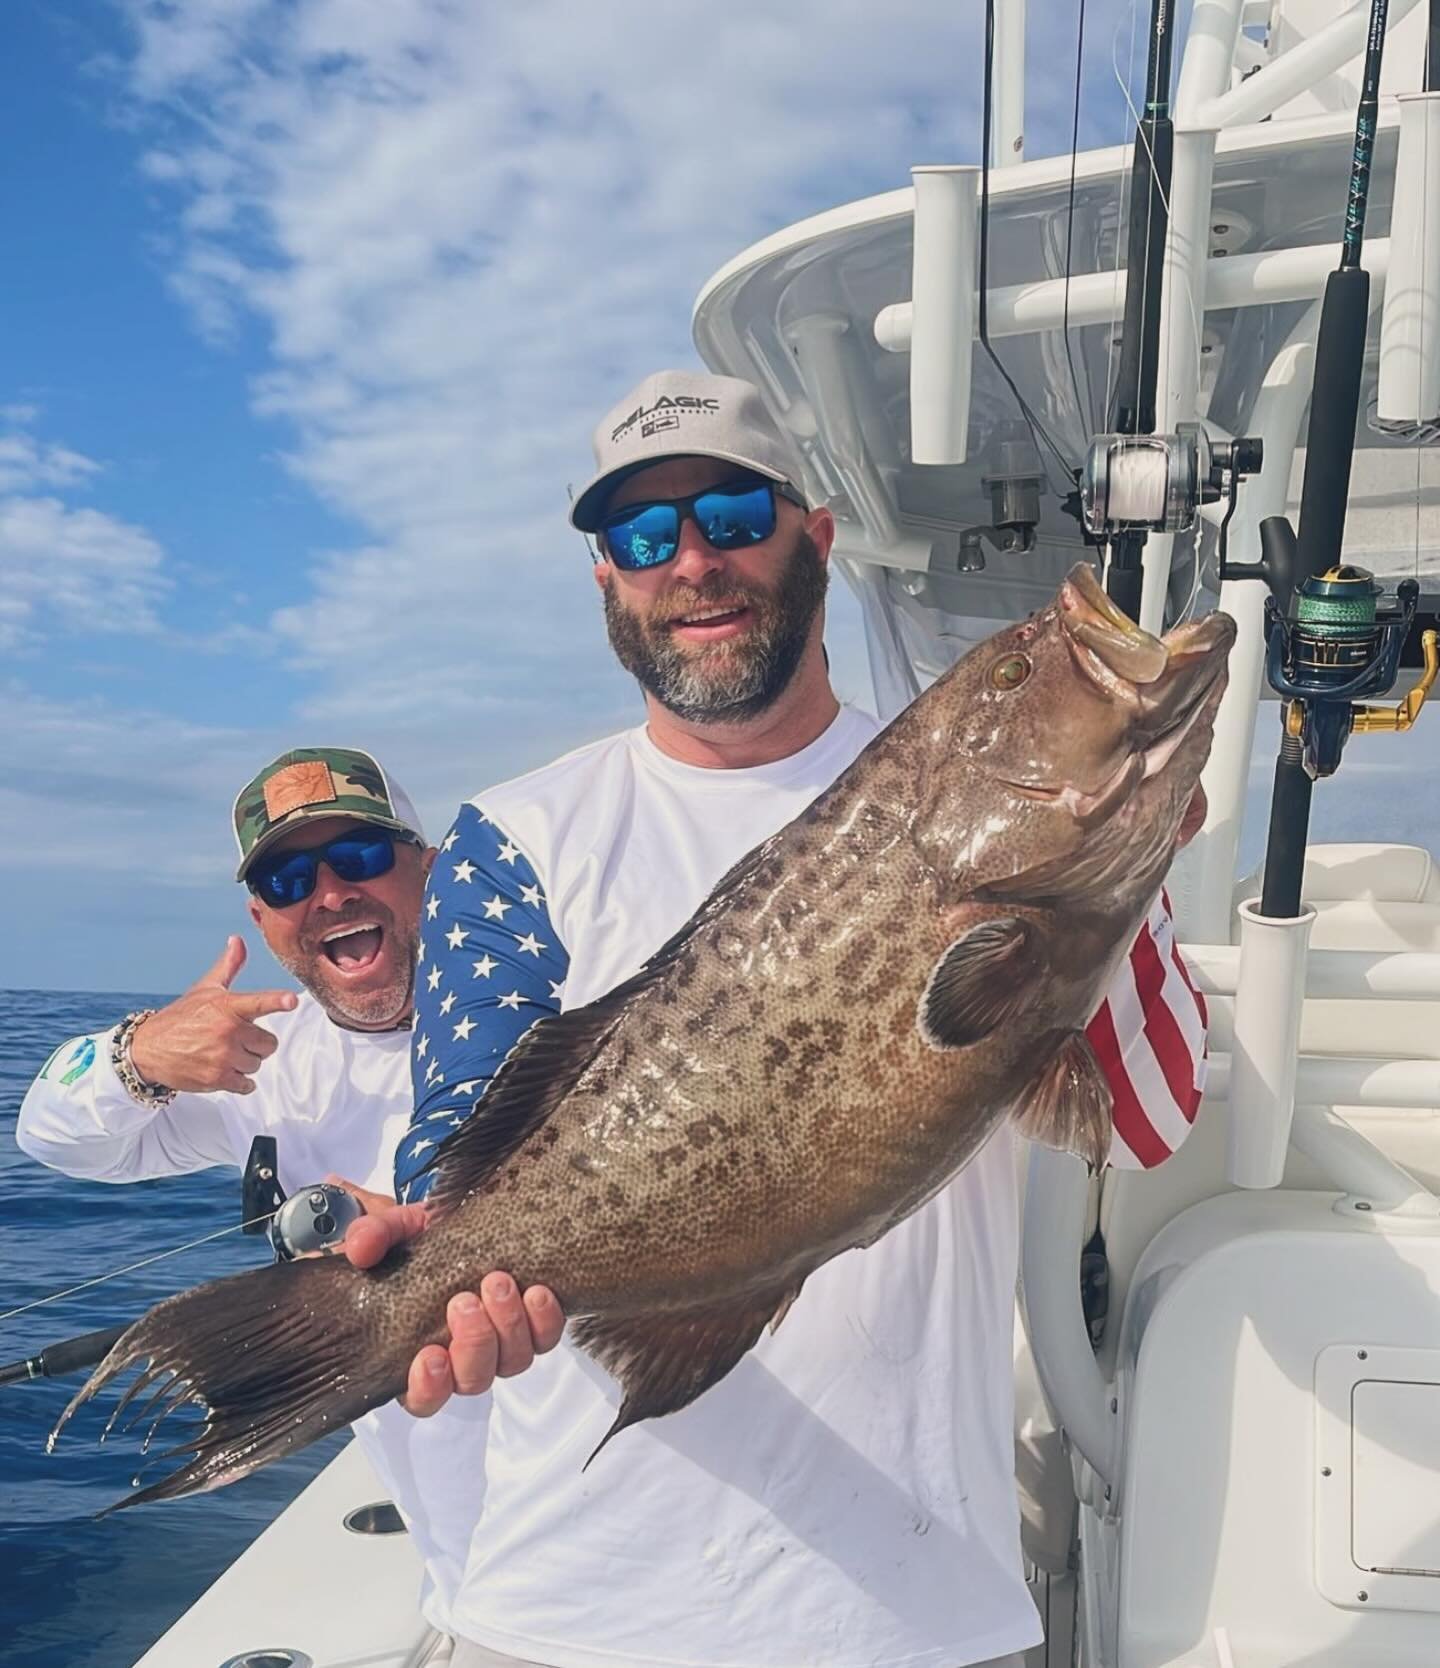 Great fishing today!! We just had a cancellation for this Saturday and Sunday, we have a 42&rsquo; available! 5/4 5/5 
Give us a call! 
.
.
@SaltFeverGuideService&mdash;&gt; 910.250.3021
.
.
LIKE OUR PAGE TO FOLLOW THE SQUAD
🇺🇸🐟🇺🇸🐟🇺🇸🐟🇺🇸🐟?